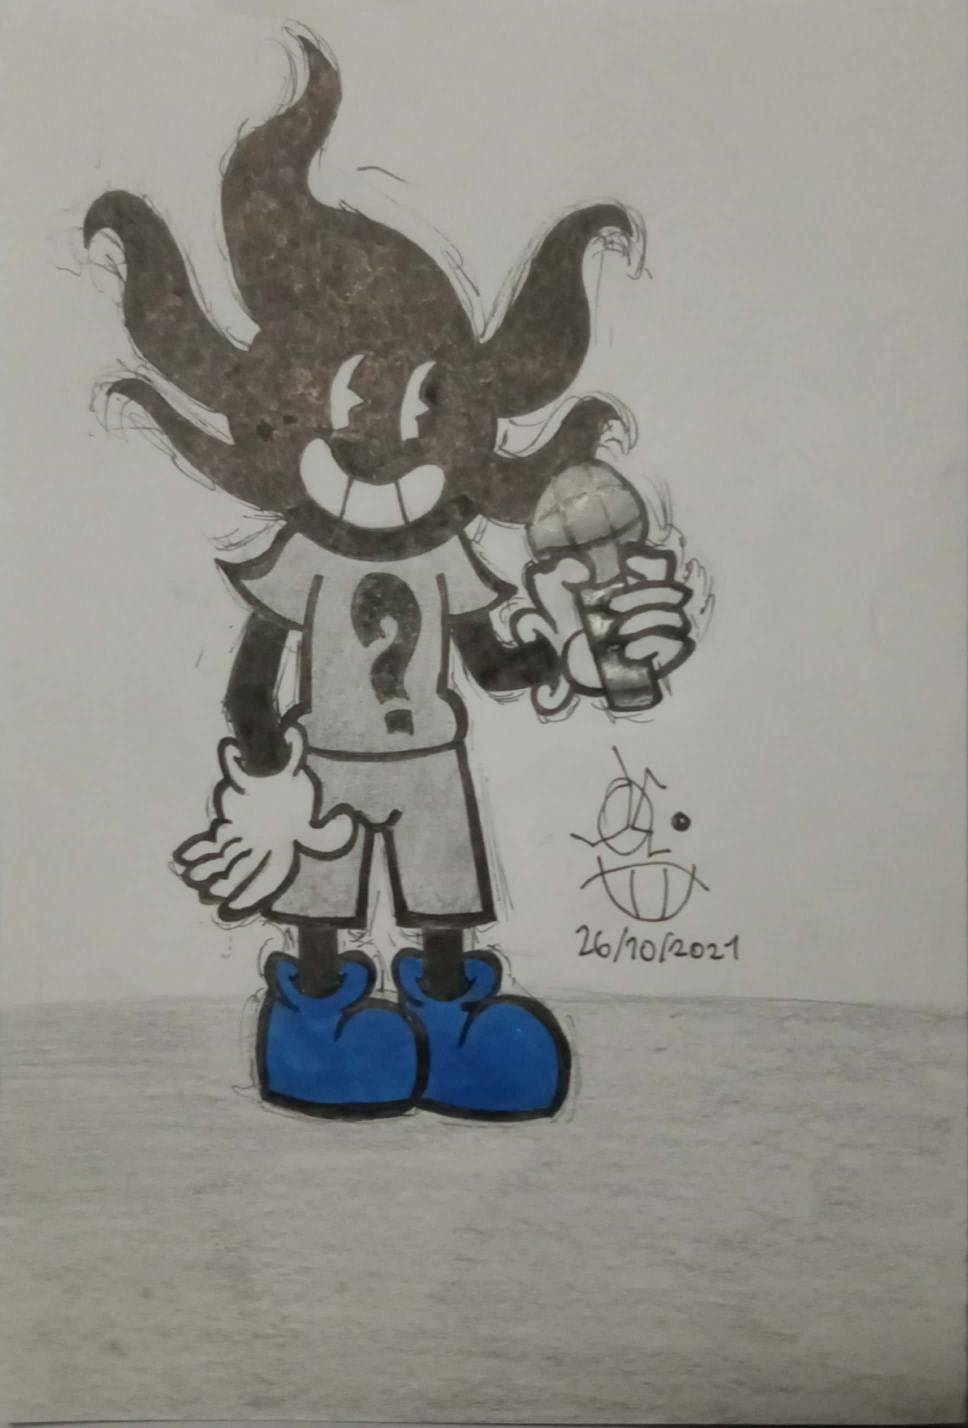 Toby S. character description by FlesCurtis on DeviantArt